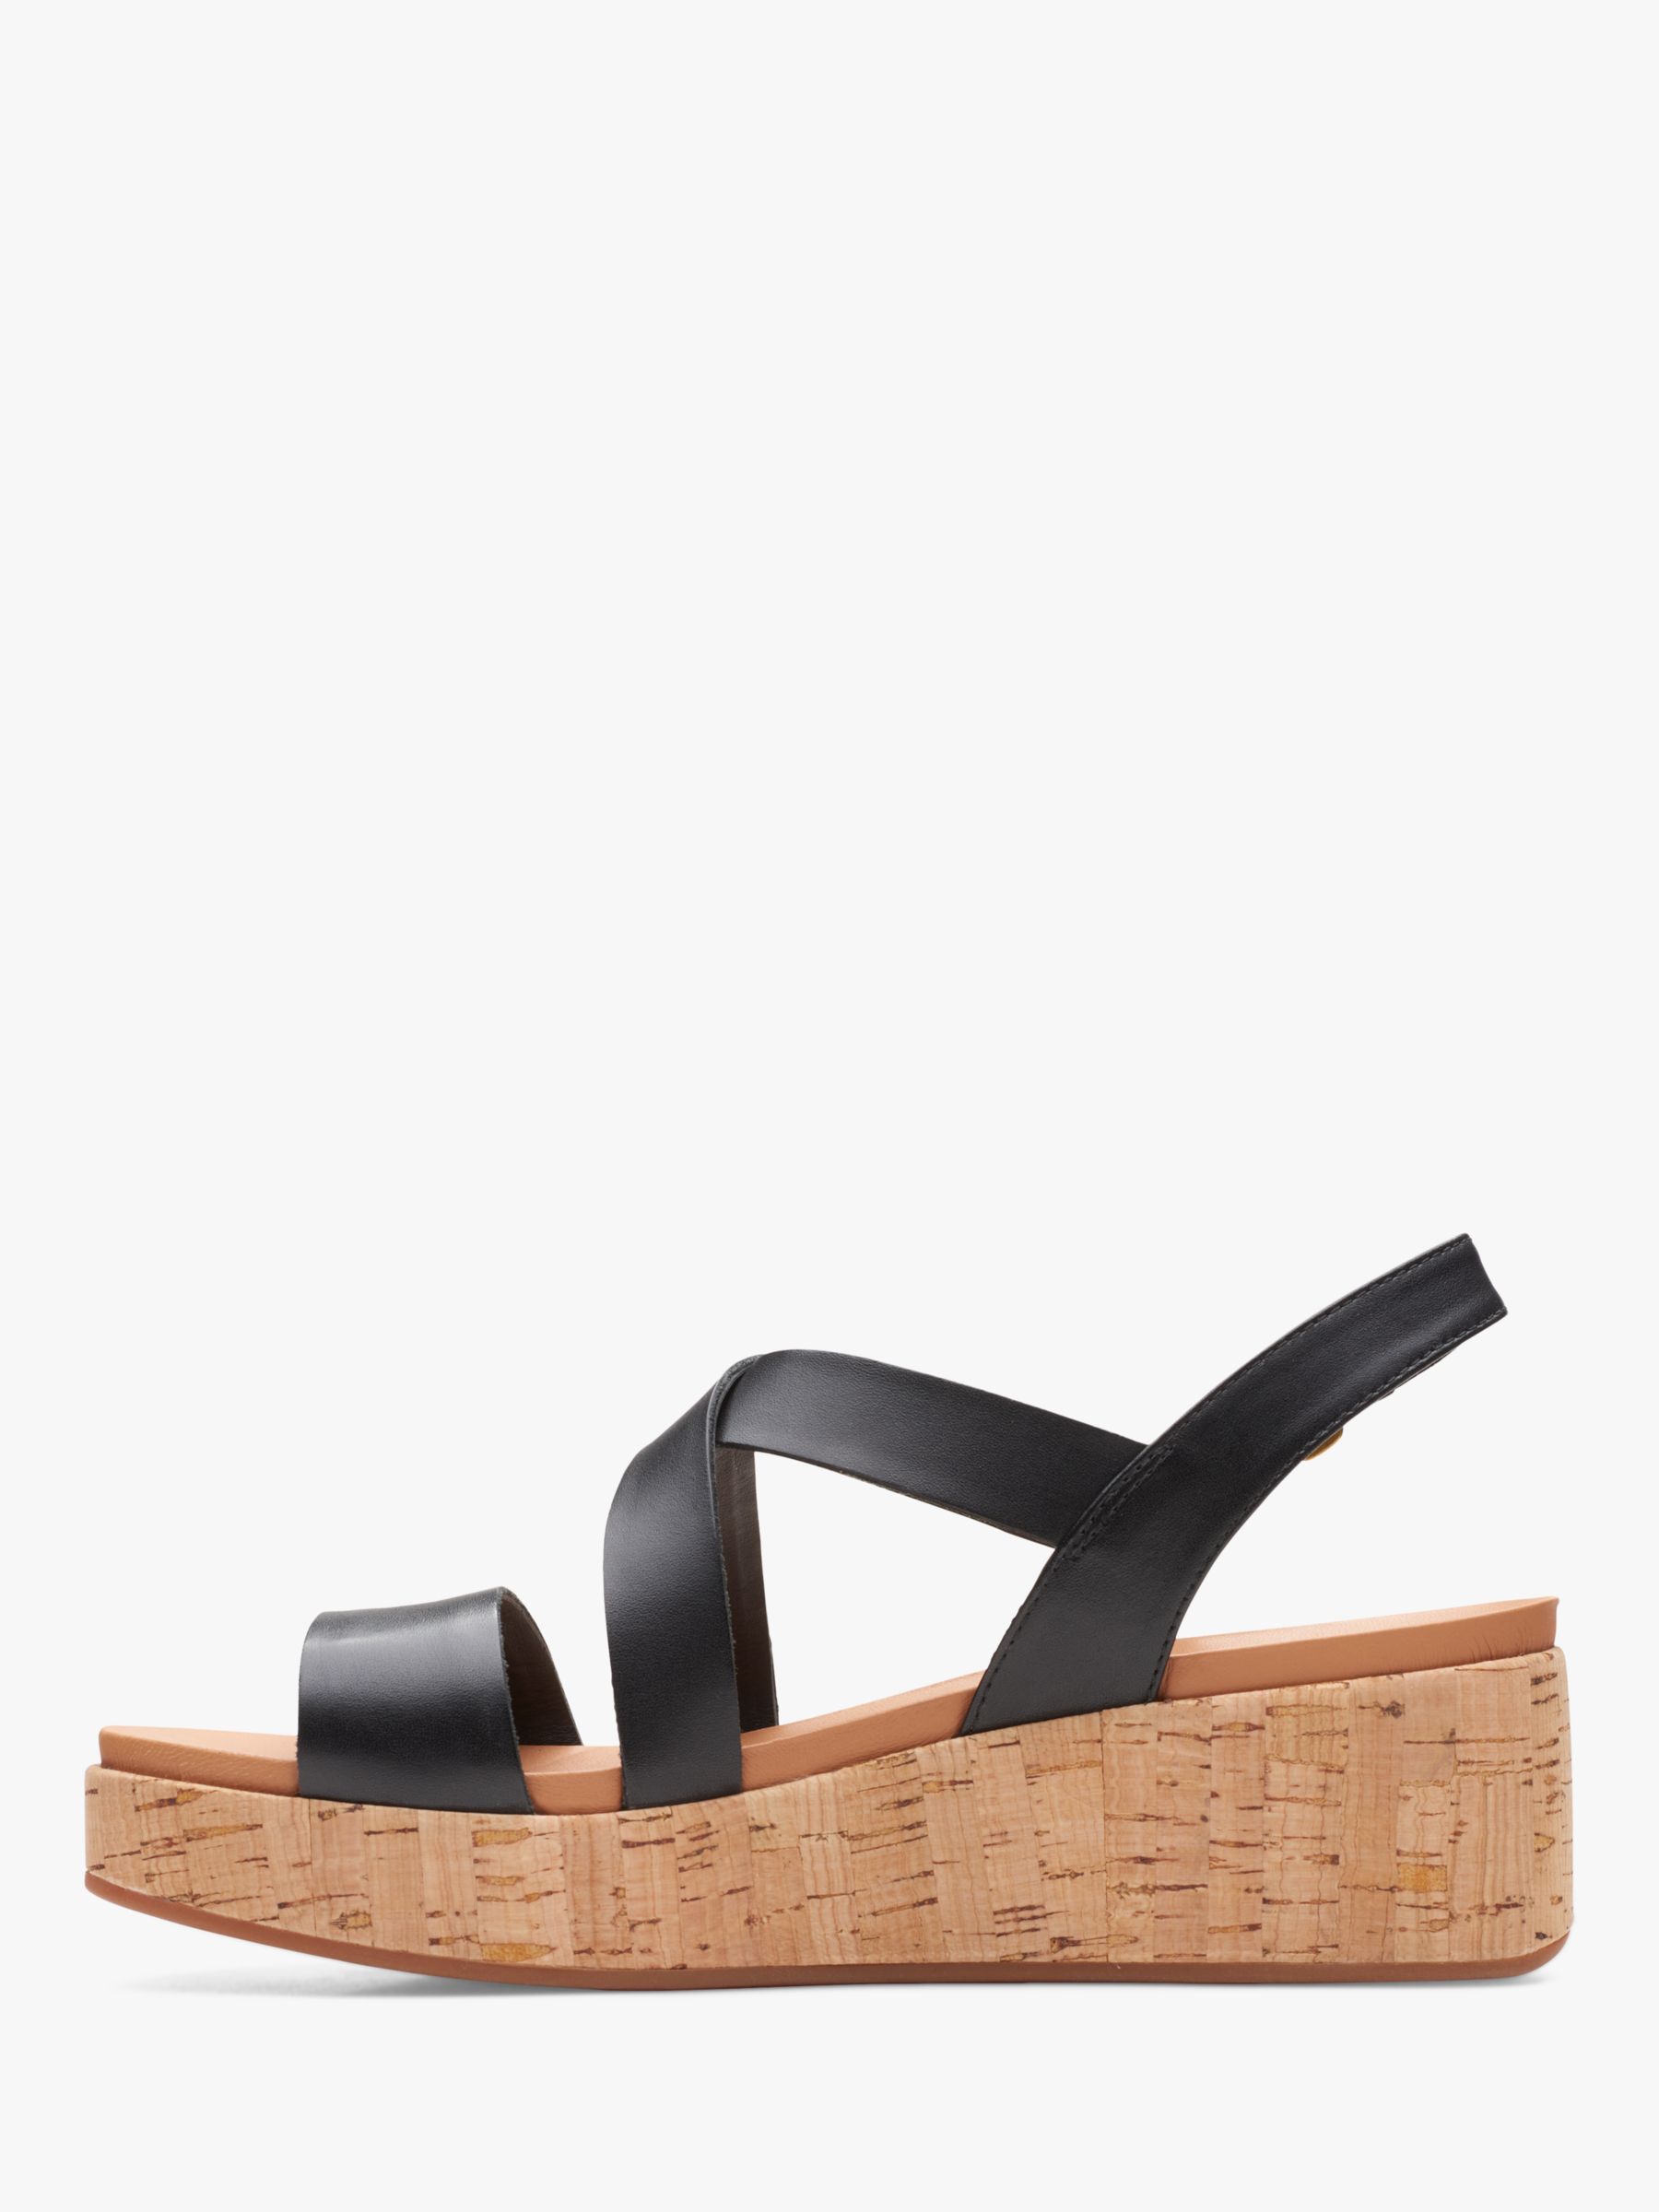 Clarks Kimmei Cork Leather Wedge Sandals, Black at John Lewis & Partners